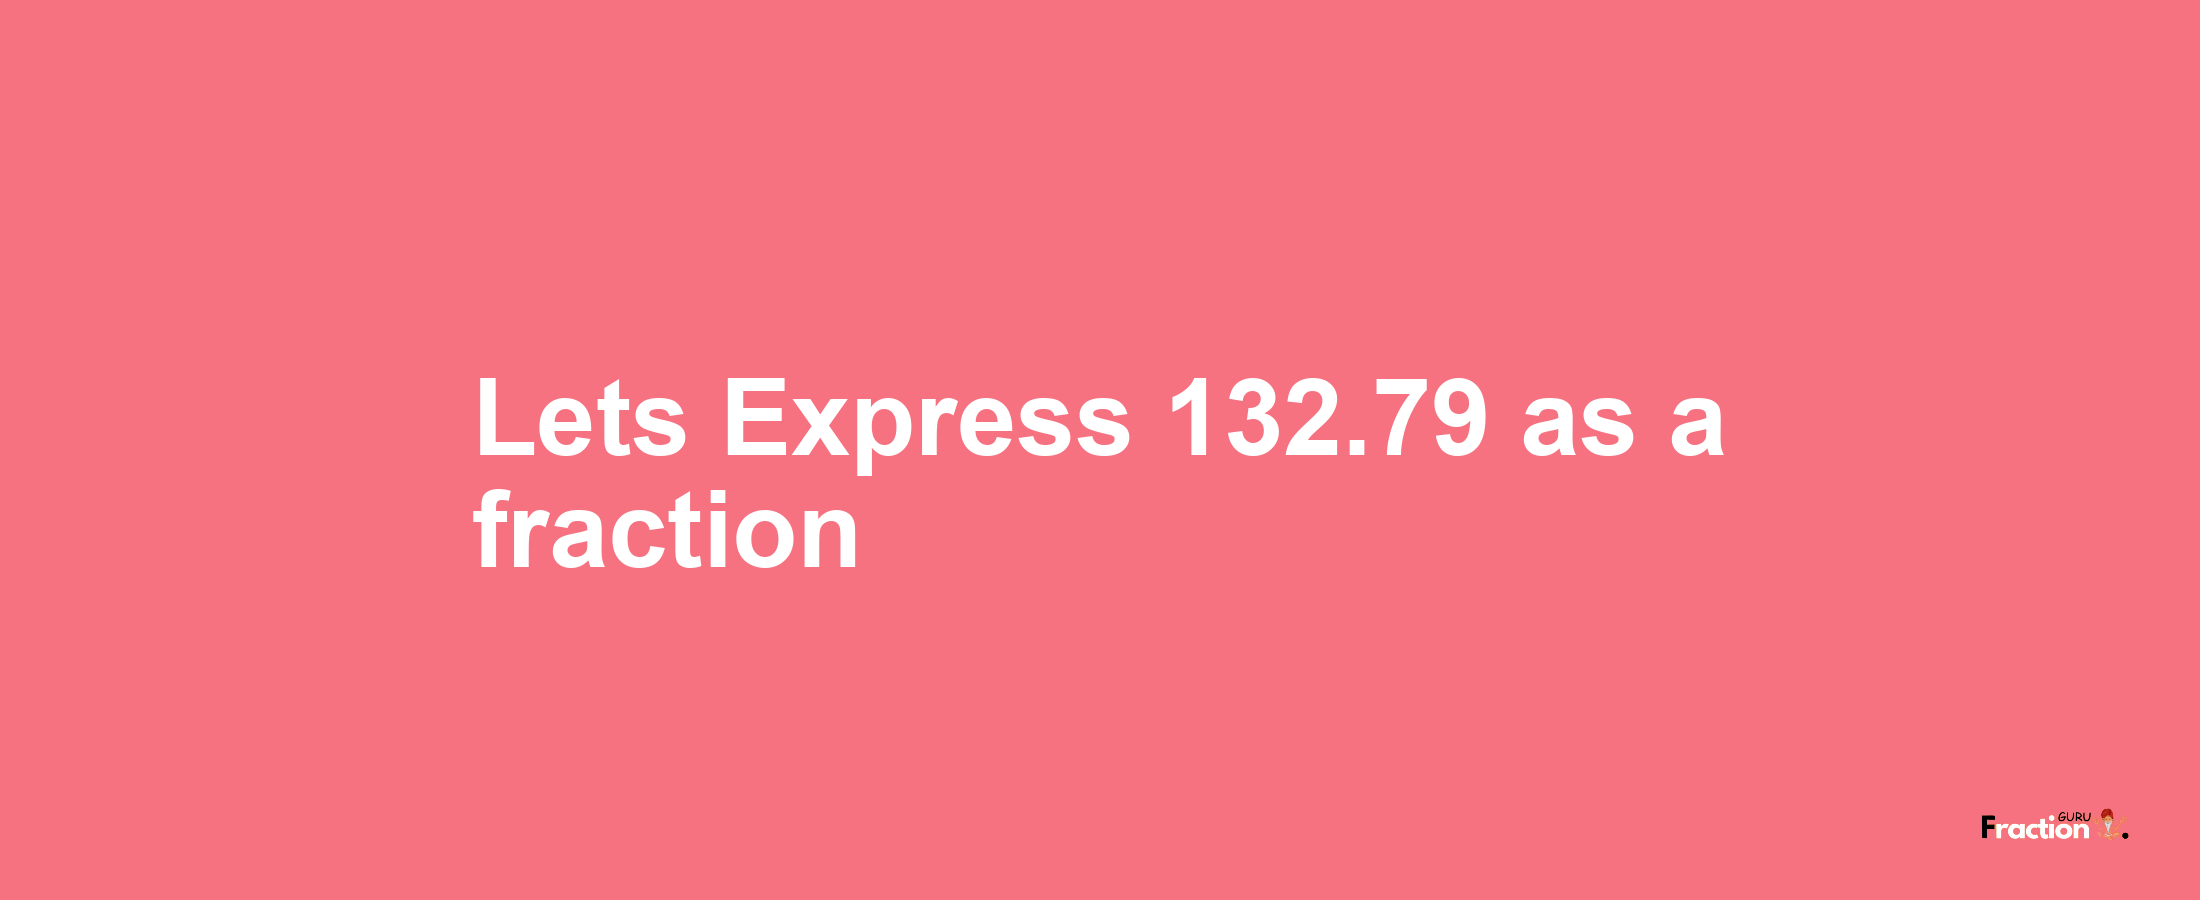 Lets Express 132.79 as afraction